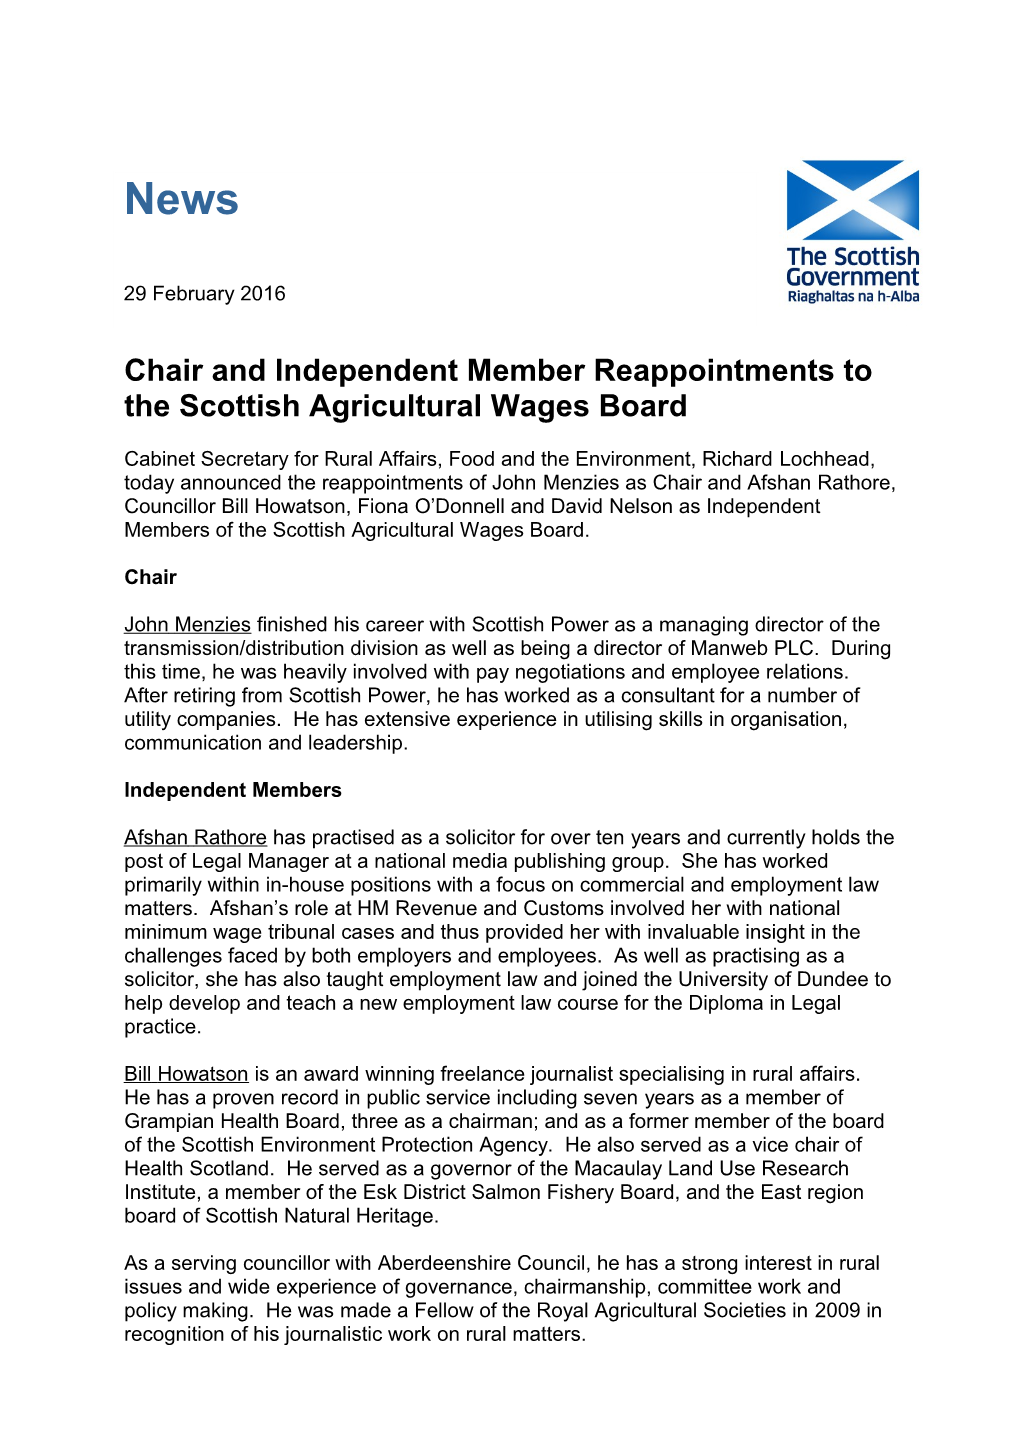 Chair and Independent Member Reappointments to the Scottish Agricultural Wages Board